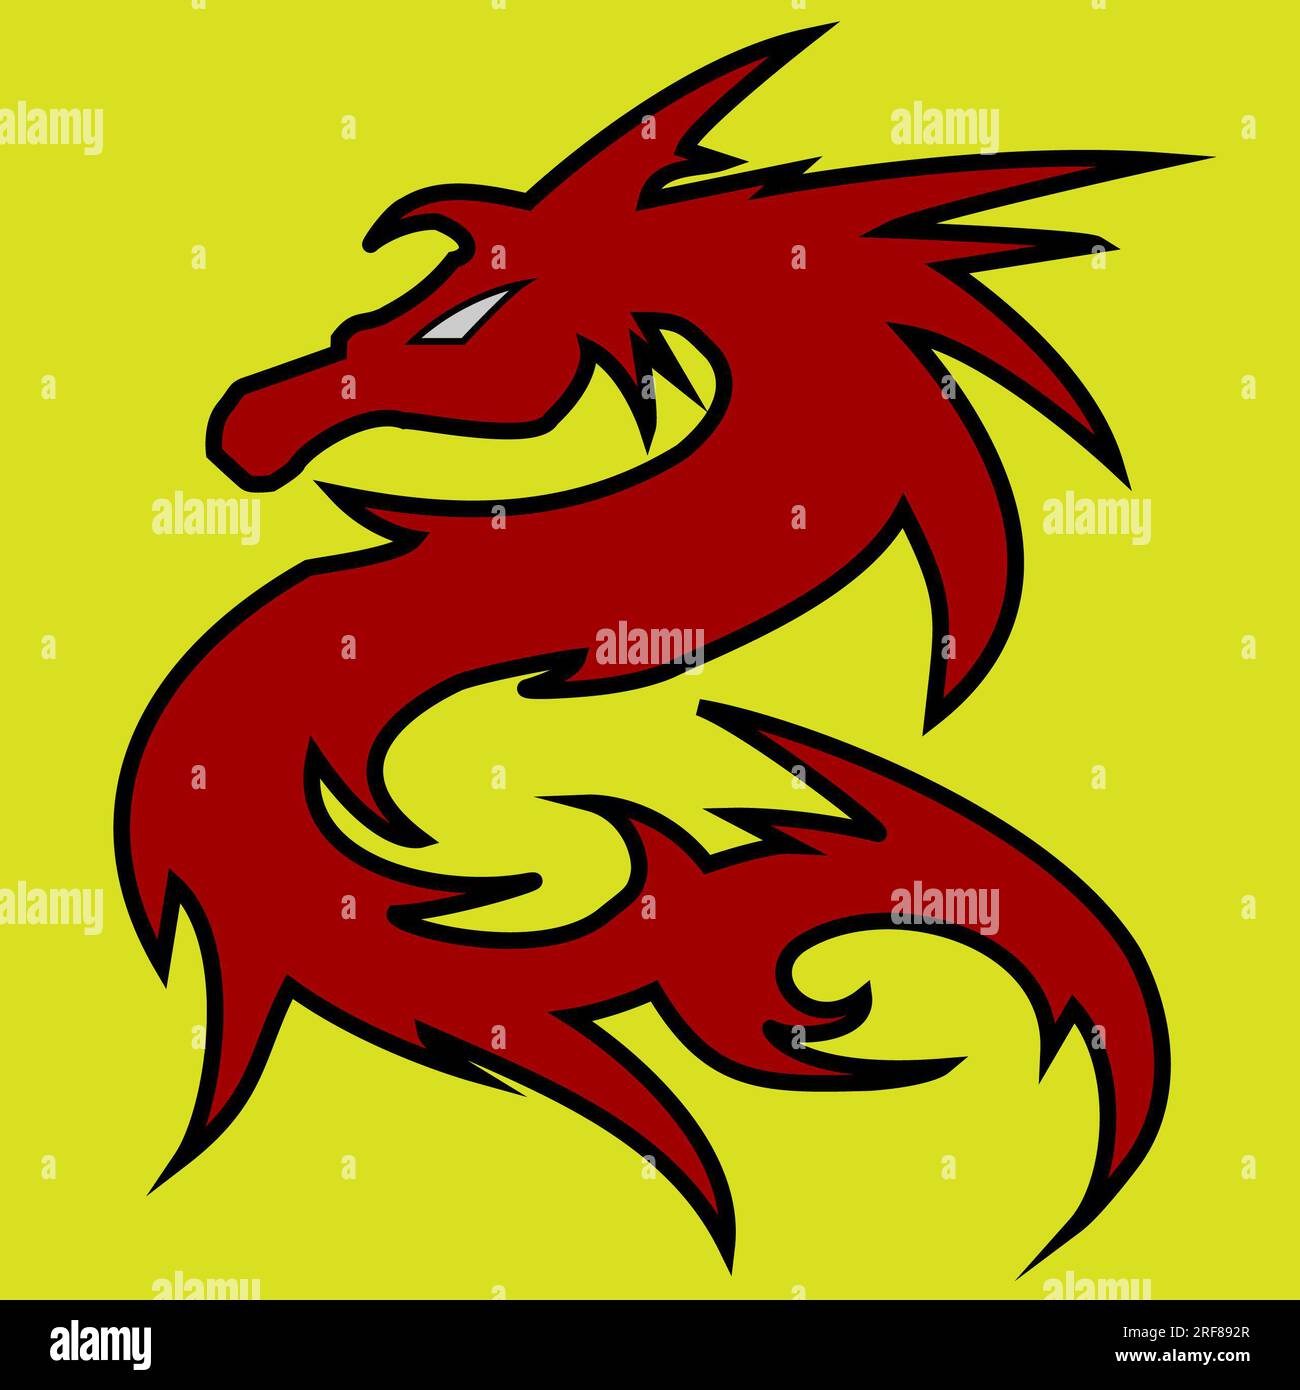 Dragon, dragon illustration, dragon with sharp eye and curves, suitable for Chinese adv and sign and banner, Japanese anime style dragon Stock Photo